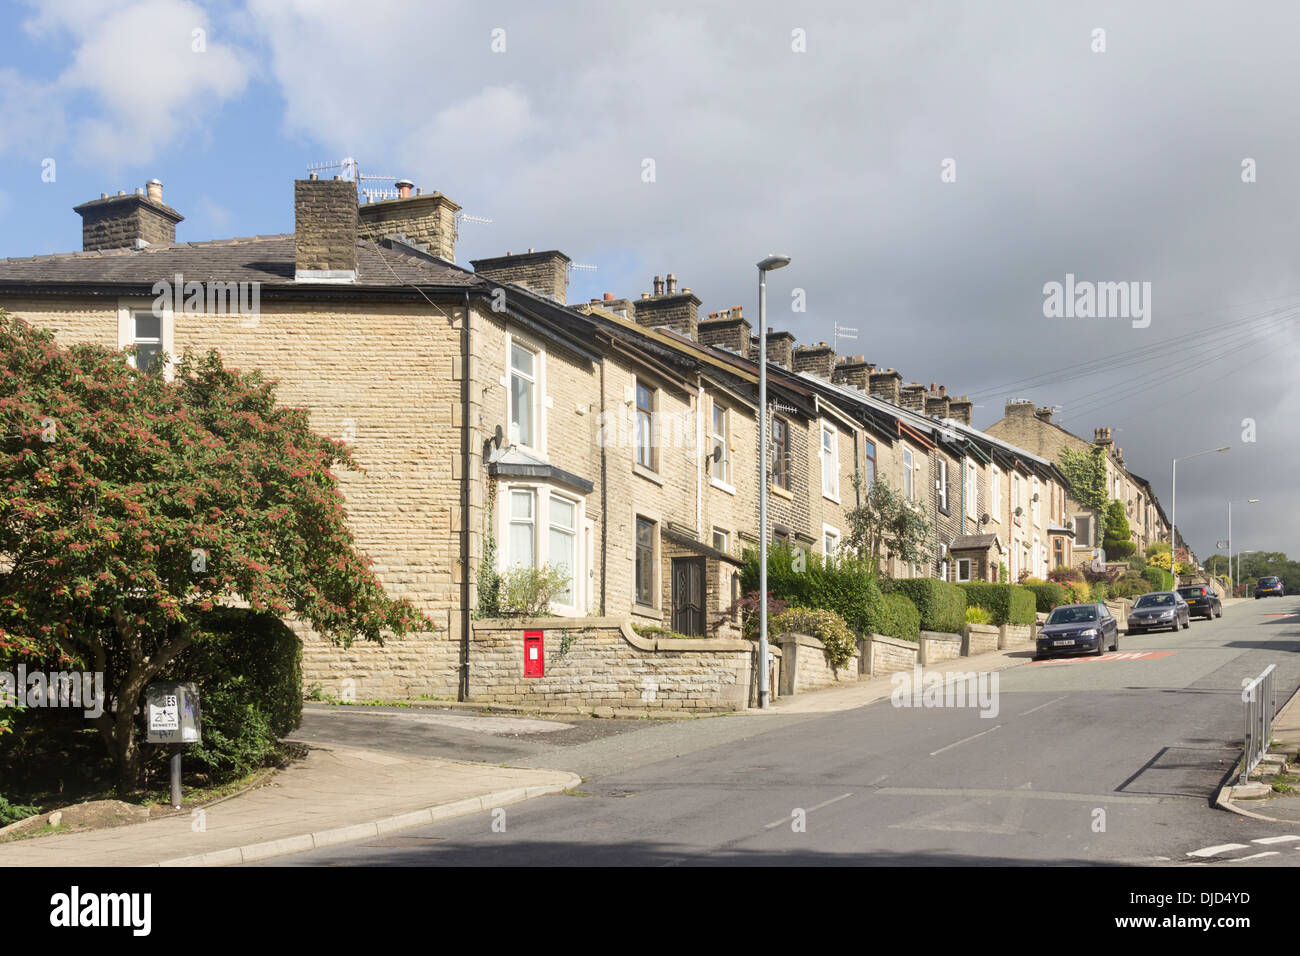 The eastern section of Peel Brow, Ramsbottom, Lancashire. Looking east from its junction with Bury New Road. Stock Photo